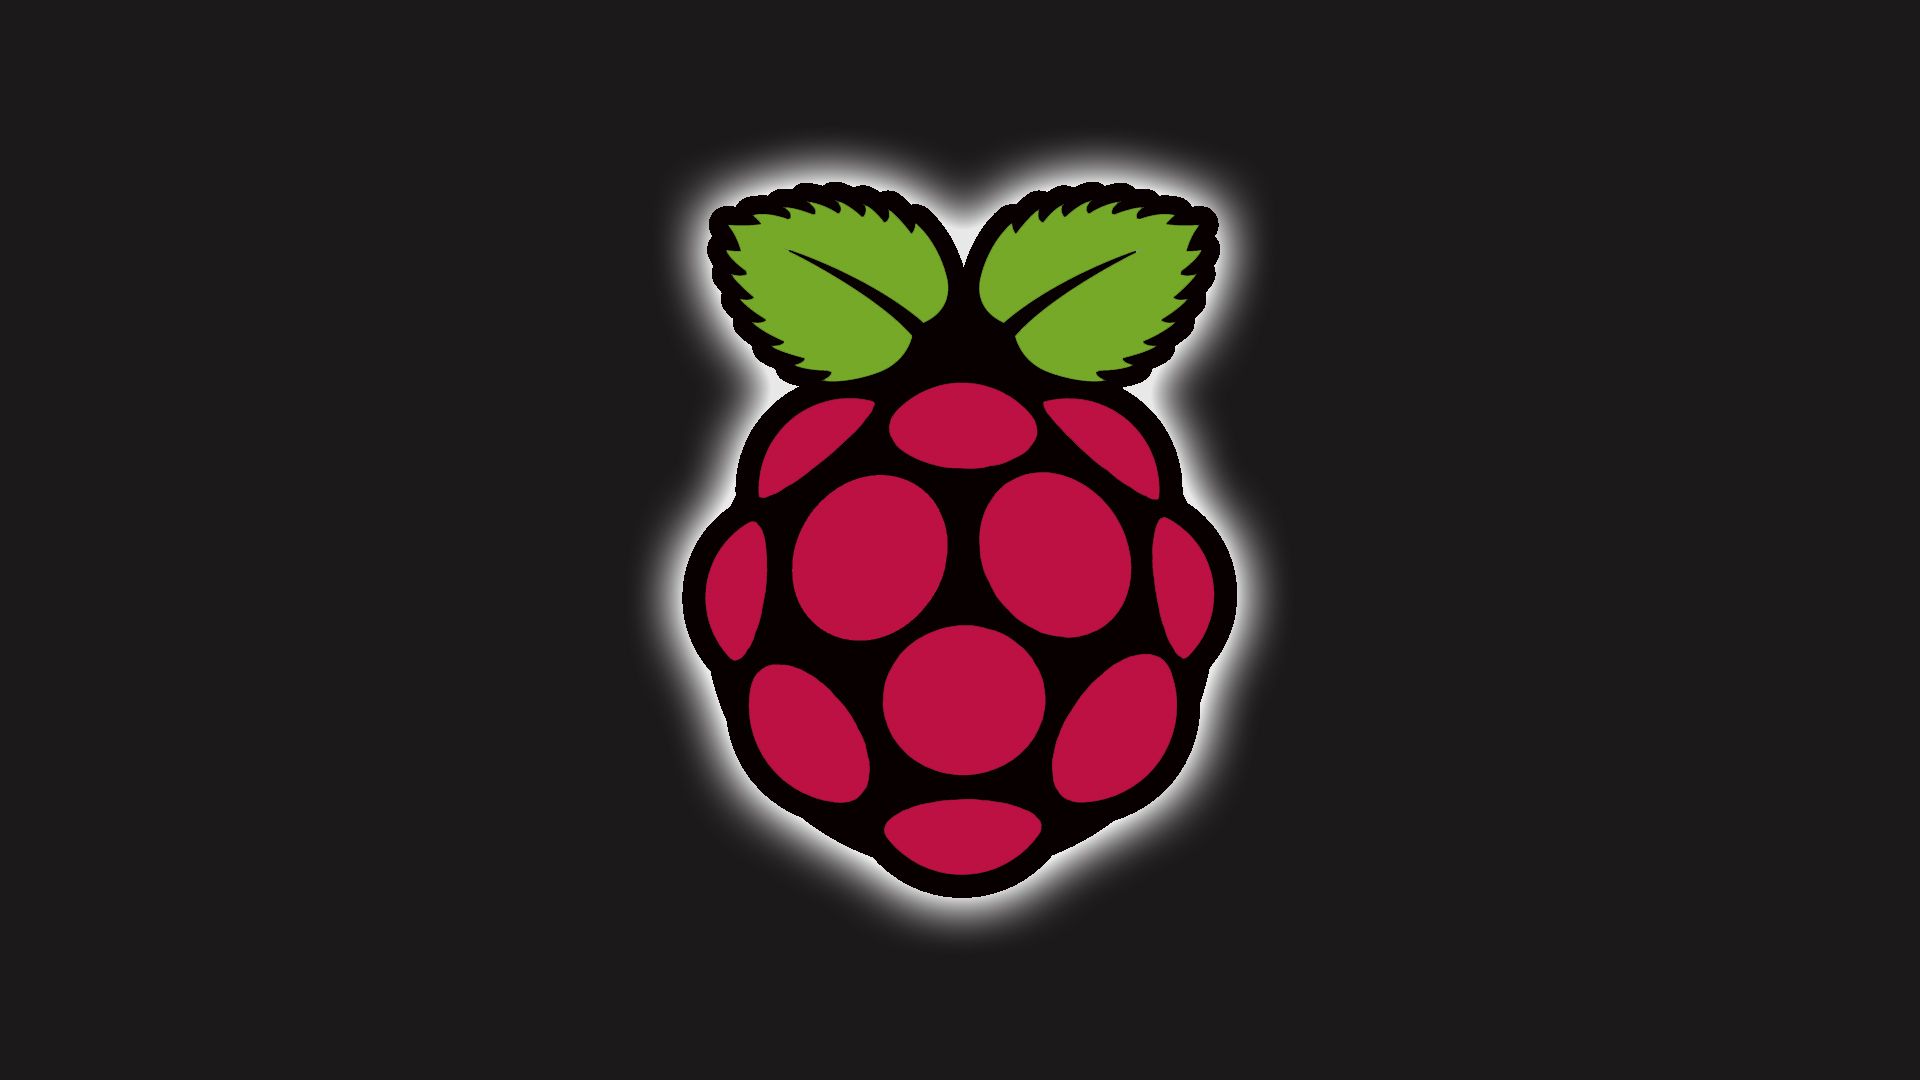 Desktop Background with Feh for Raspberry Pi | Engineer Demos ...